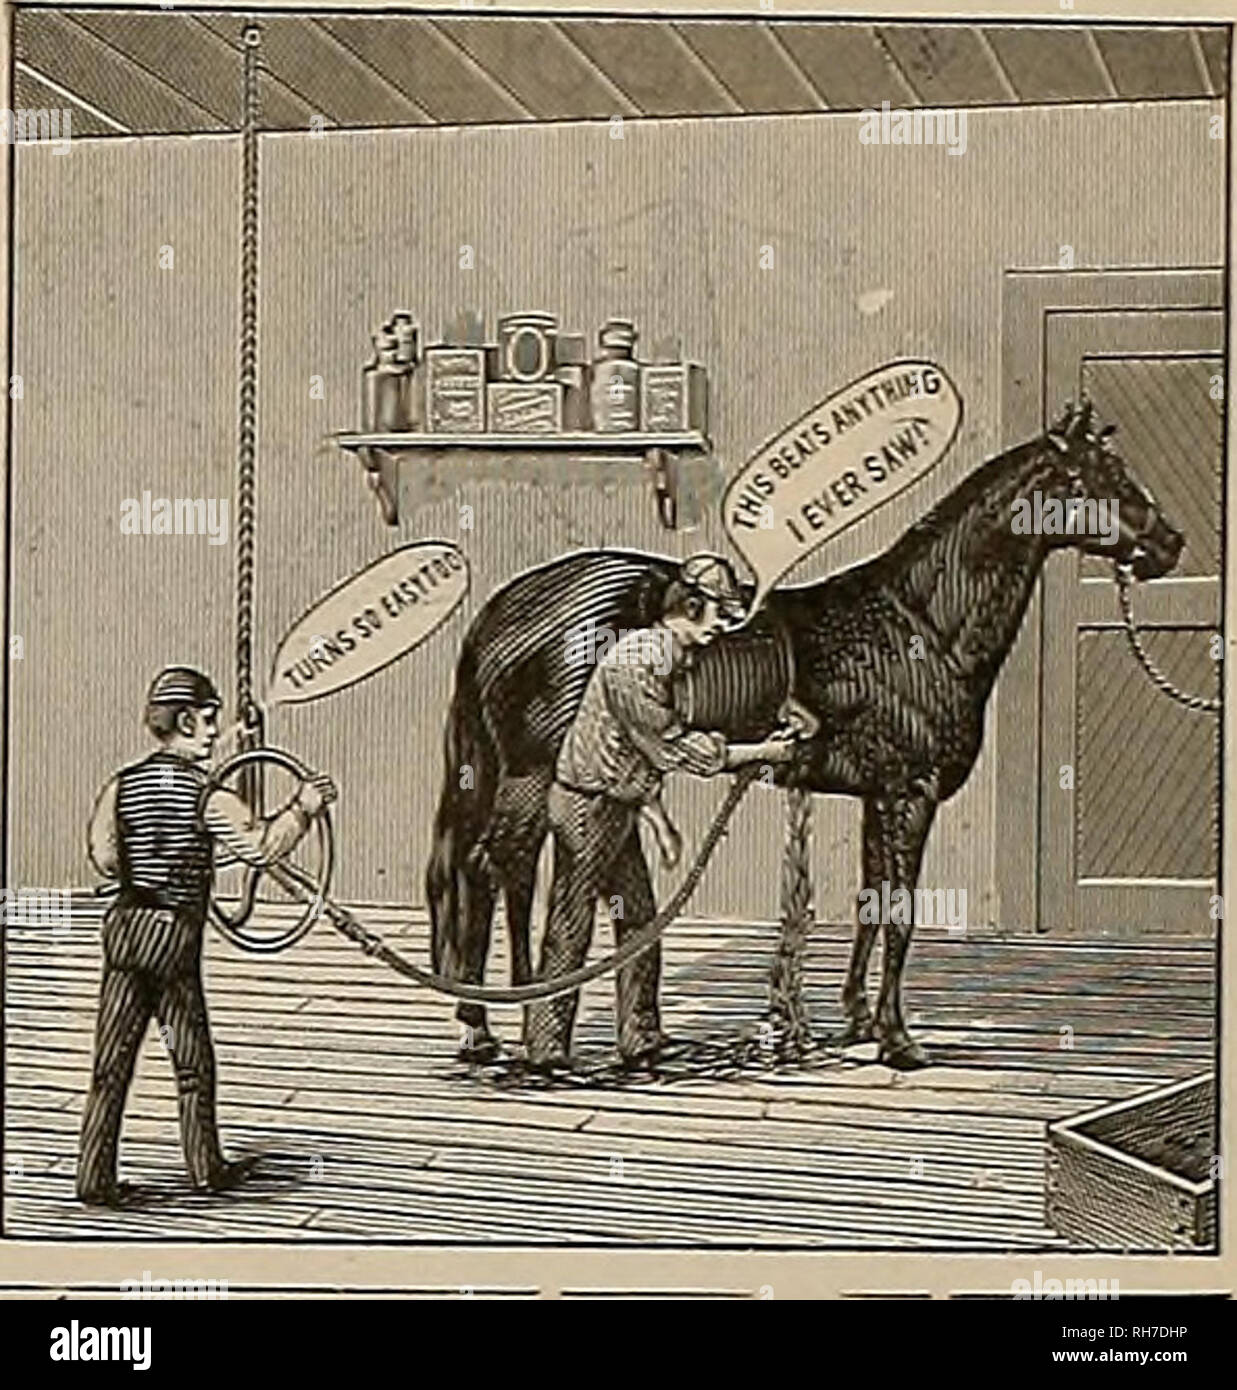 . Breeder and sportsman. Horses. Chicago Bicycle Clipper Lis0 Equal to Steam c 98 Chicago Clipper i Price $6.75. ur Very Latest, Equal to Steam or Electricity. Roller Bearings. List Price $8.75. Over 15,000 Sold Last Season. No belts; no slip. There are more of these machines in use than all other make* combined. WE ARE THE ORIGINATORS OF EVER THING NEW AND MODERN IN THE LINE OF CLIPPINC MACHINES. Making and selling more tban all other manufacturers combined. Send for our new i lustra ted Don't forget that we make the CLARK CARRIAGE HEATER. Catalogue, just nut. PRICE S3.50. CHICAGO FLEXIBLE SH Stock Photo